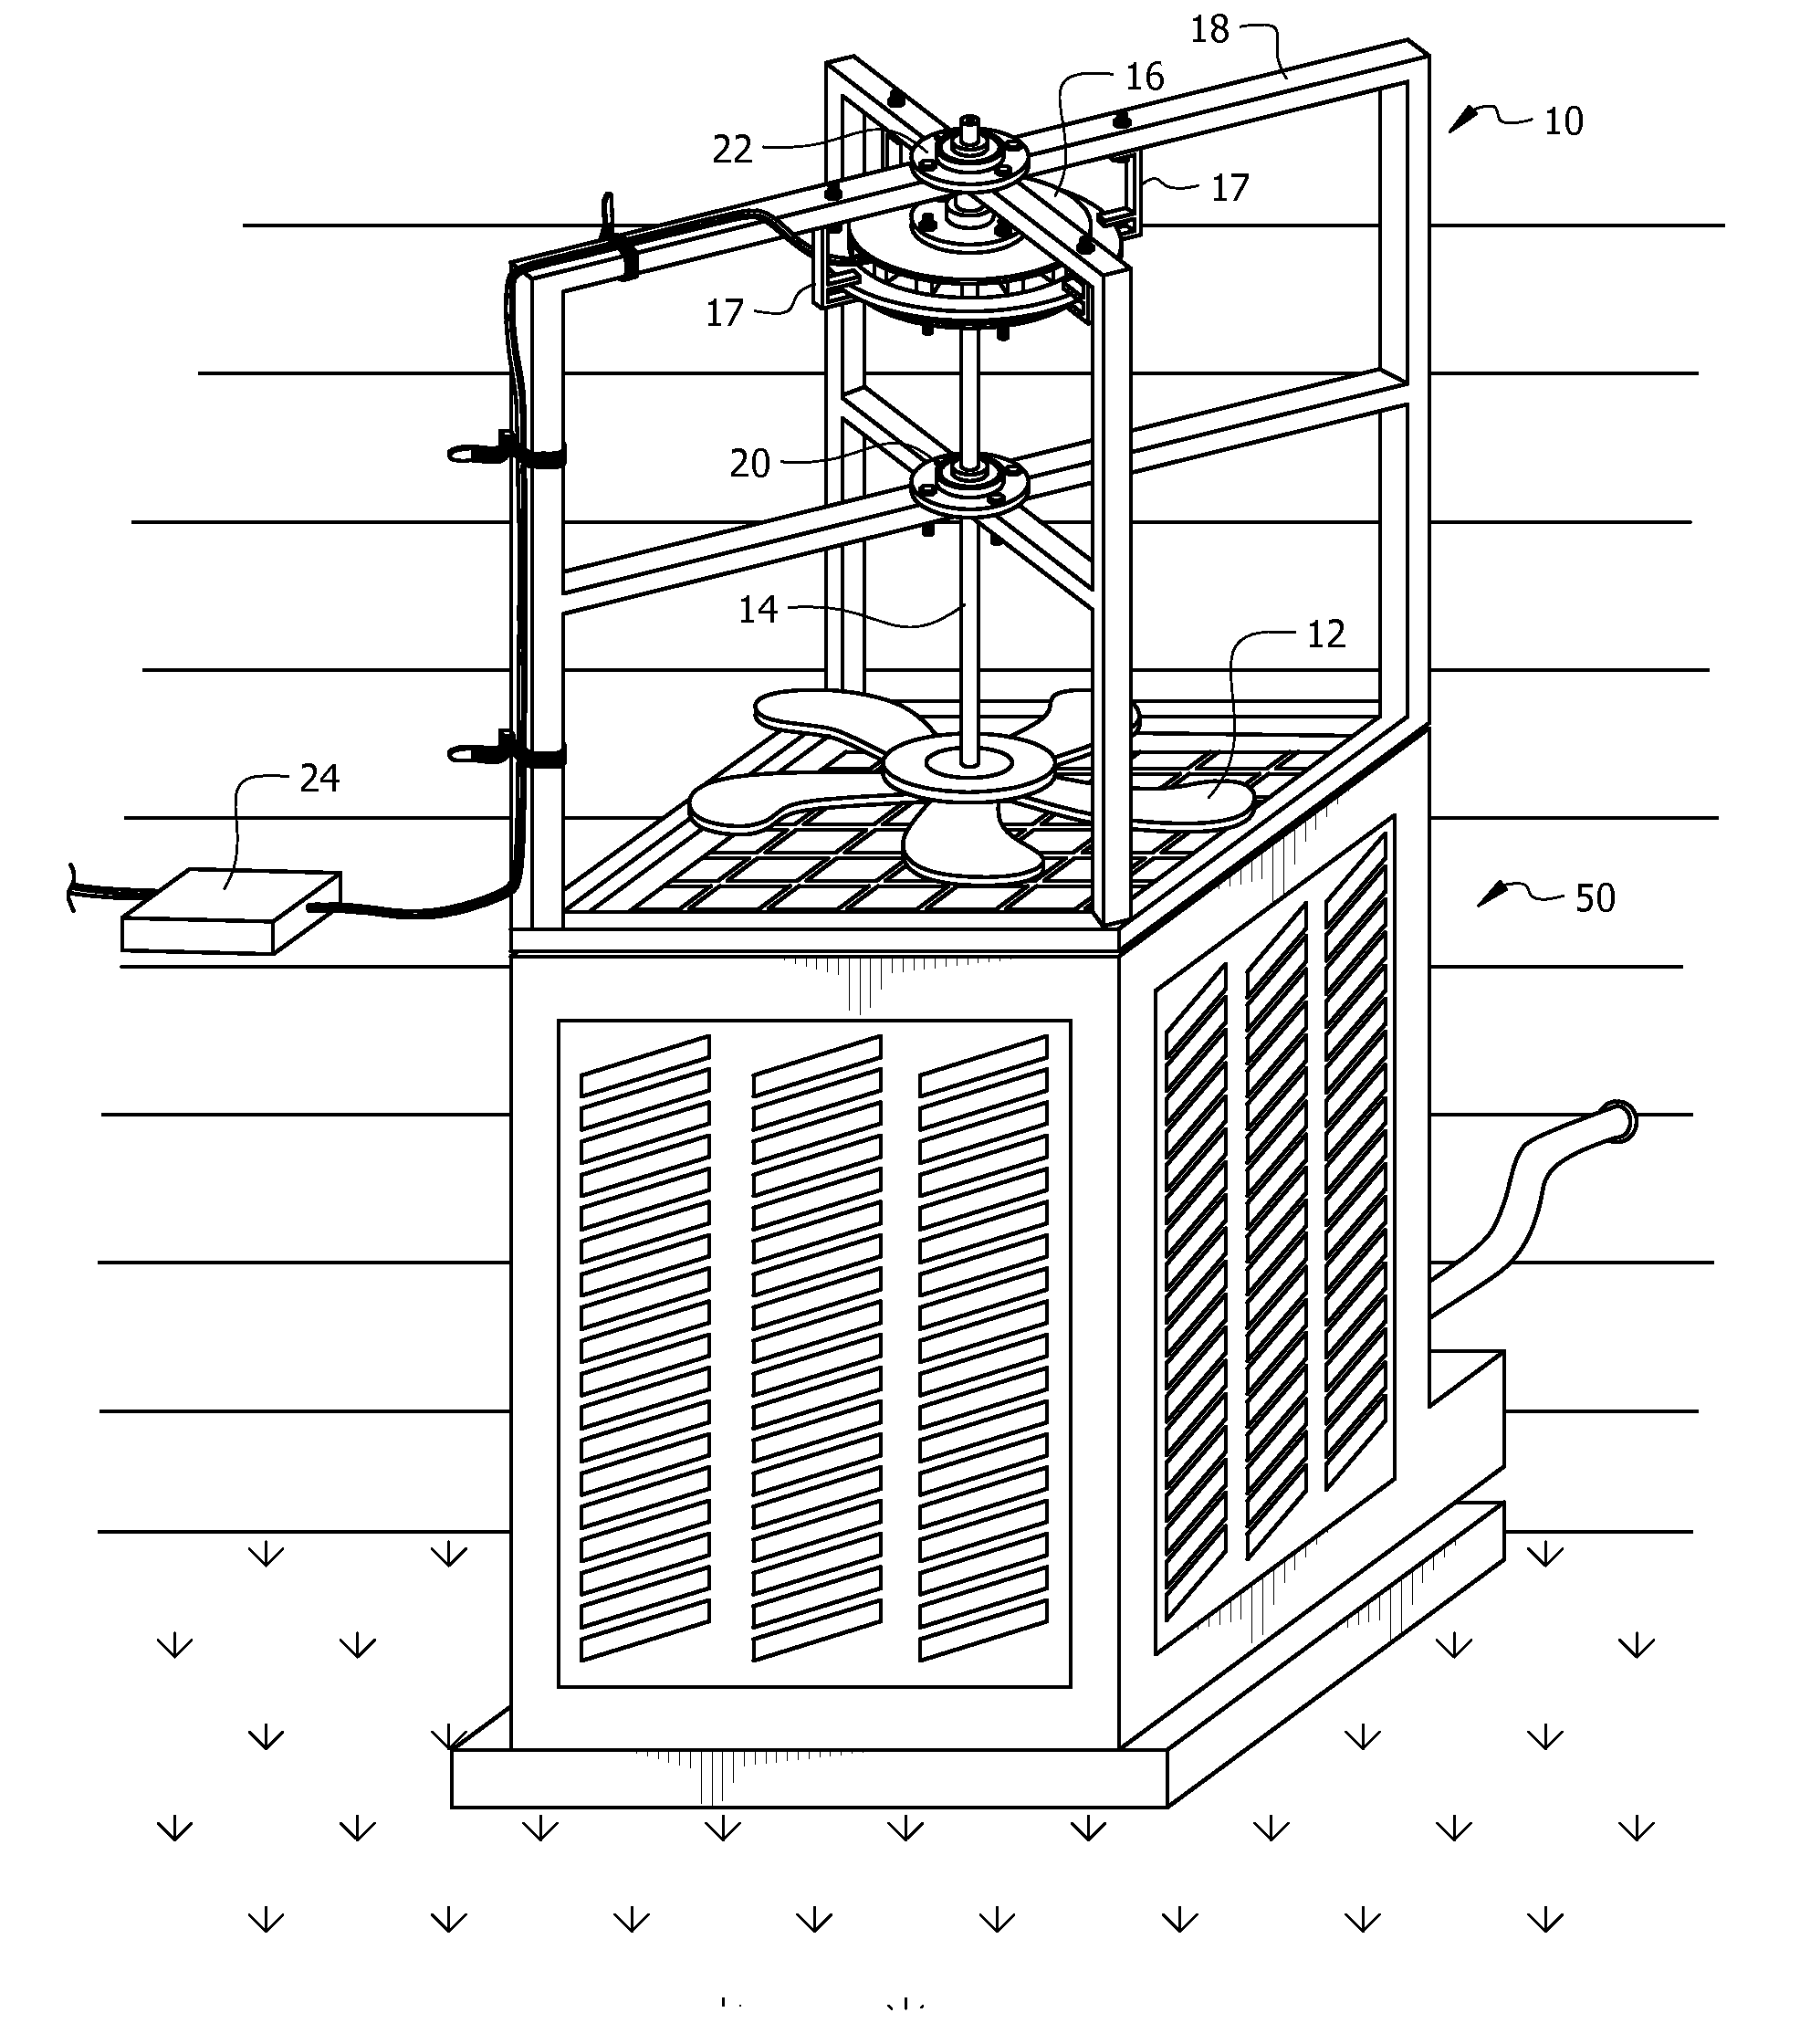 System and apparatus for the generation of electical power